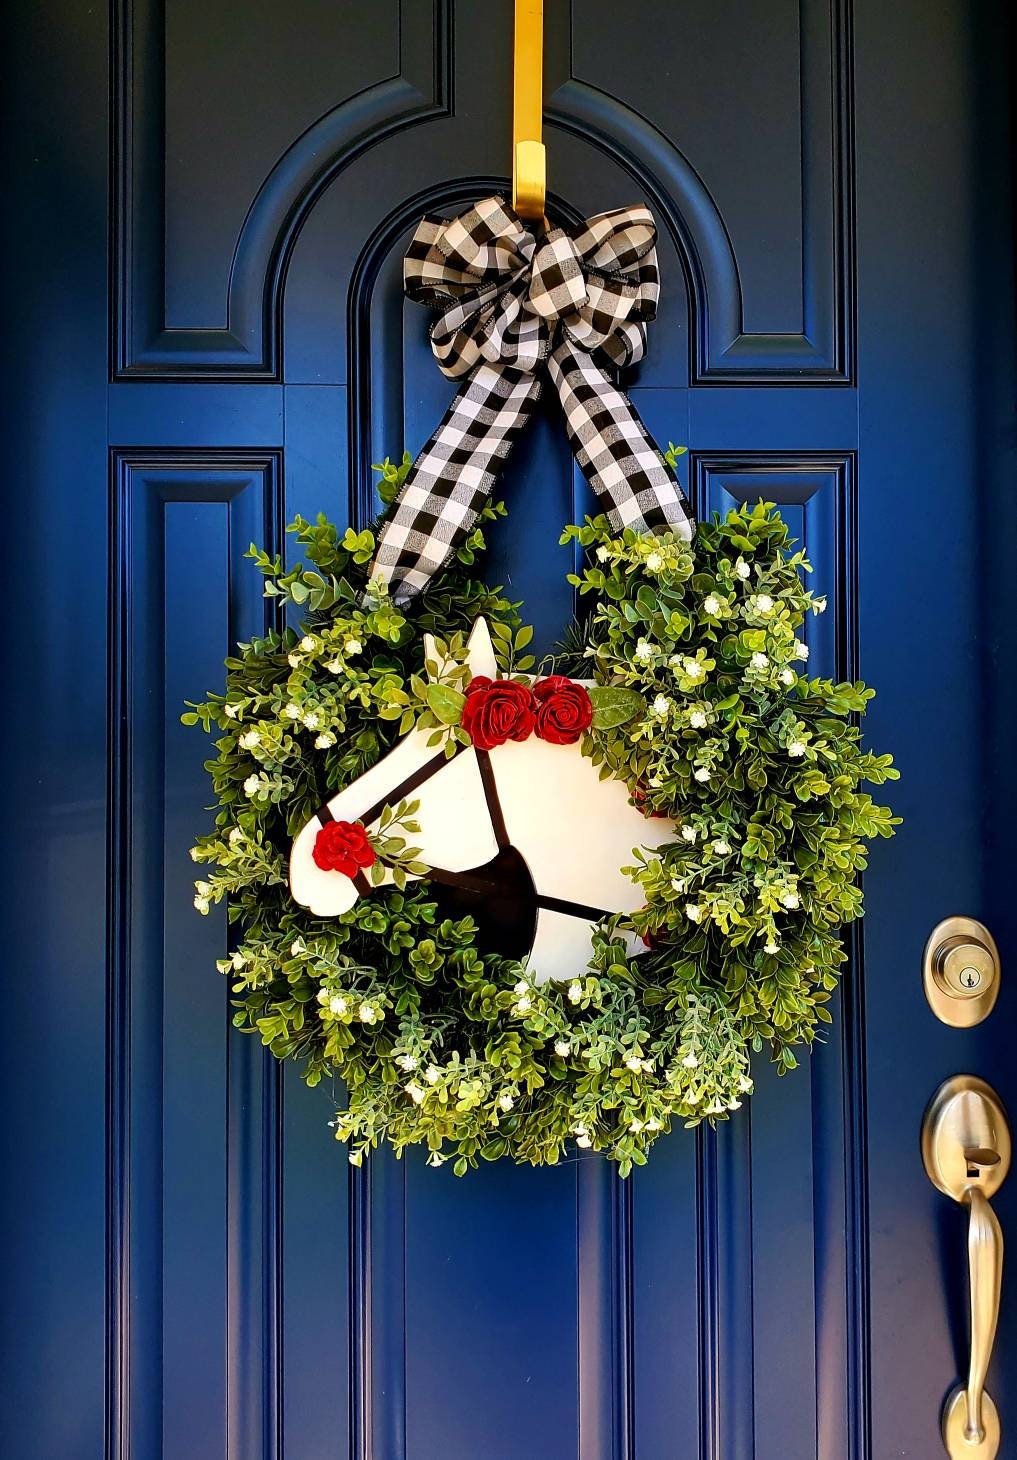 Run for the Rose's Kentucky Derby Horseshoe Wreath with Wood Horse Head Embellished with Red Roses and Checkered